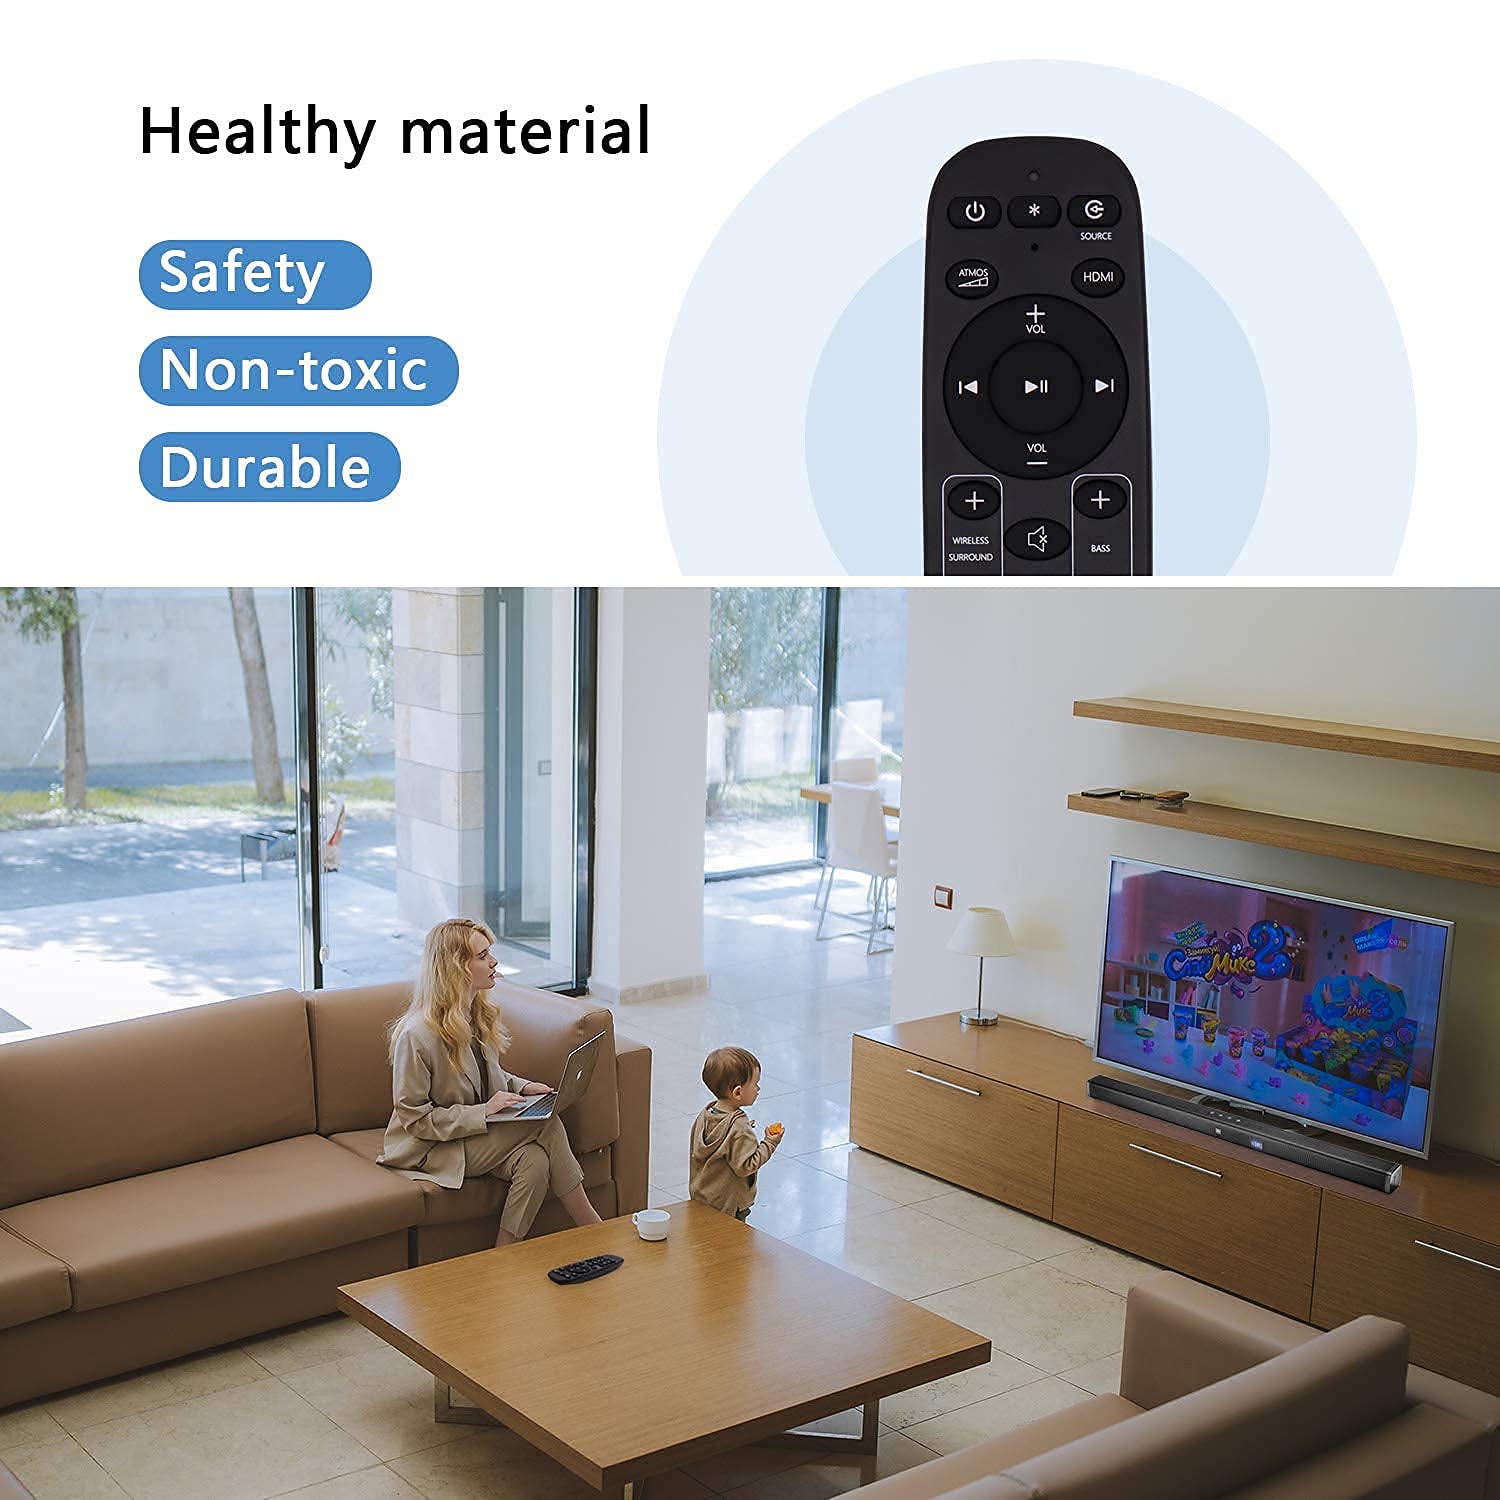 New Remote Control with Battery Replacement for JBL 9.1 Soundbar JBL 5.1 Soundbar JBL 3.1 Soundbar JBL 2.1 Soundbar JBL 2.0 Soundbar JBL JBL2GBAR51IMBLKAM Bar 5.1 Surround SoundBar System